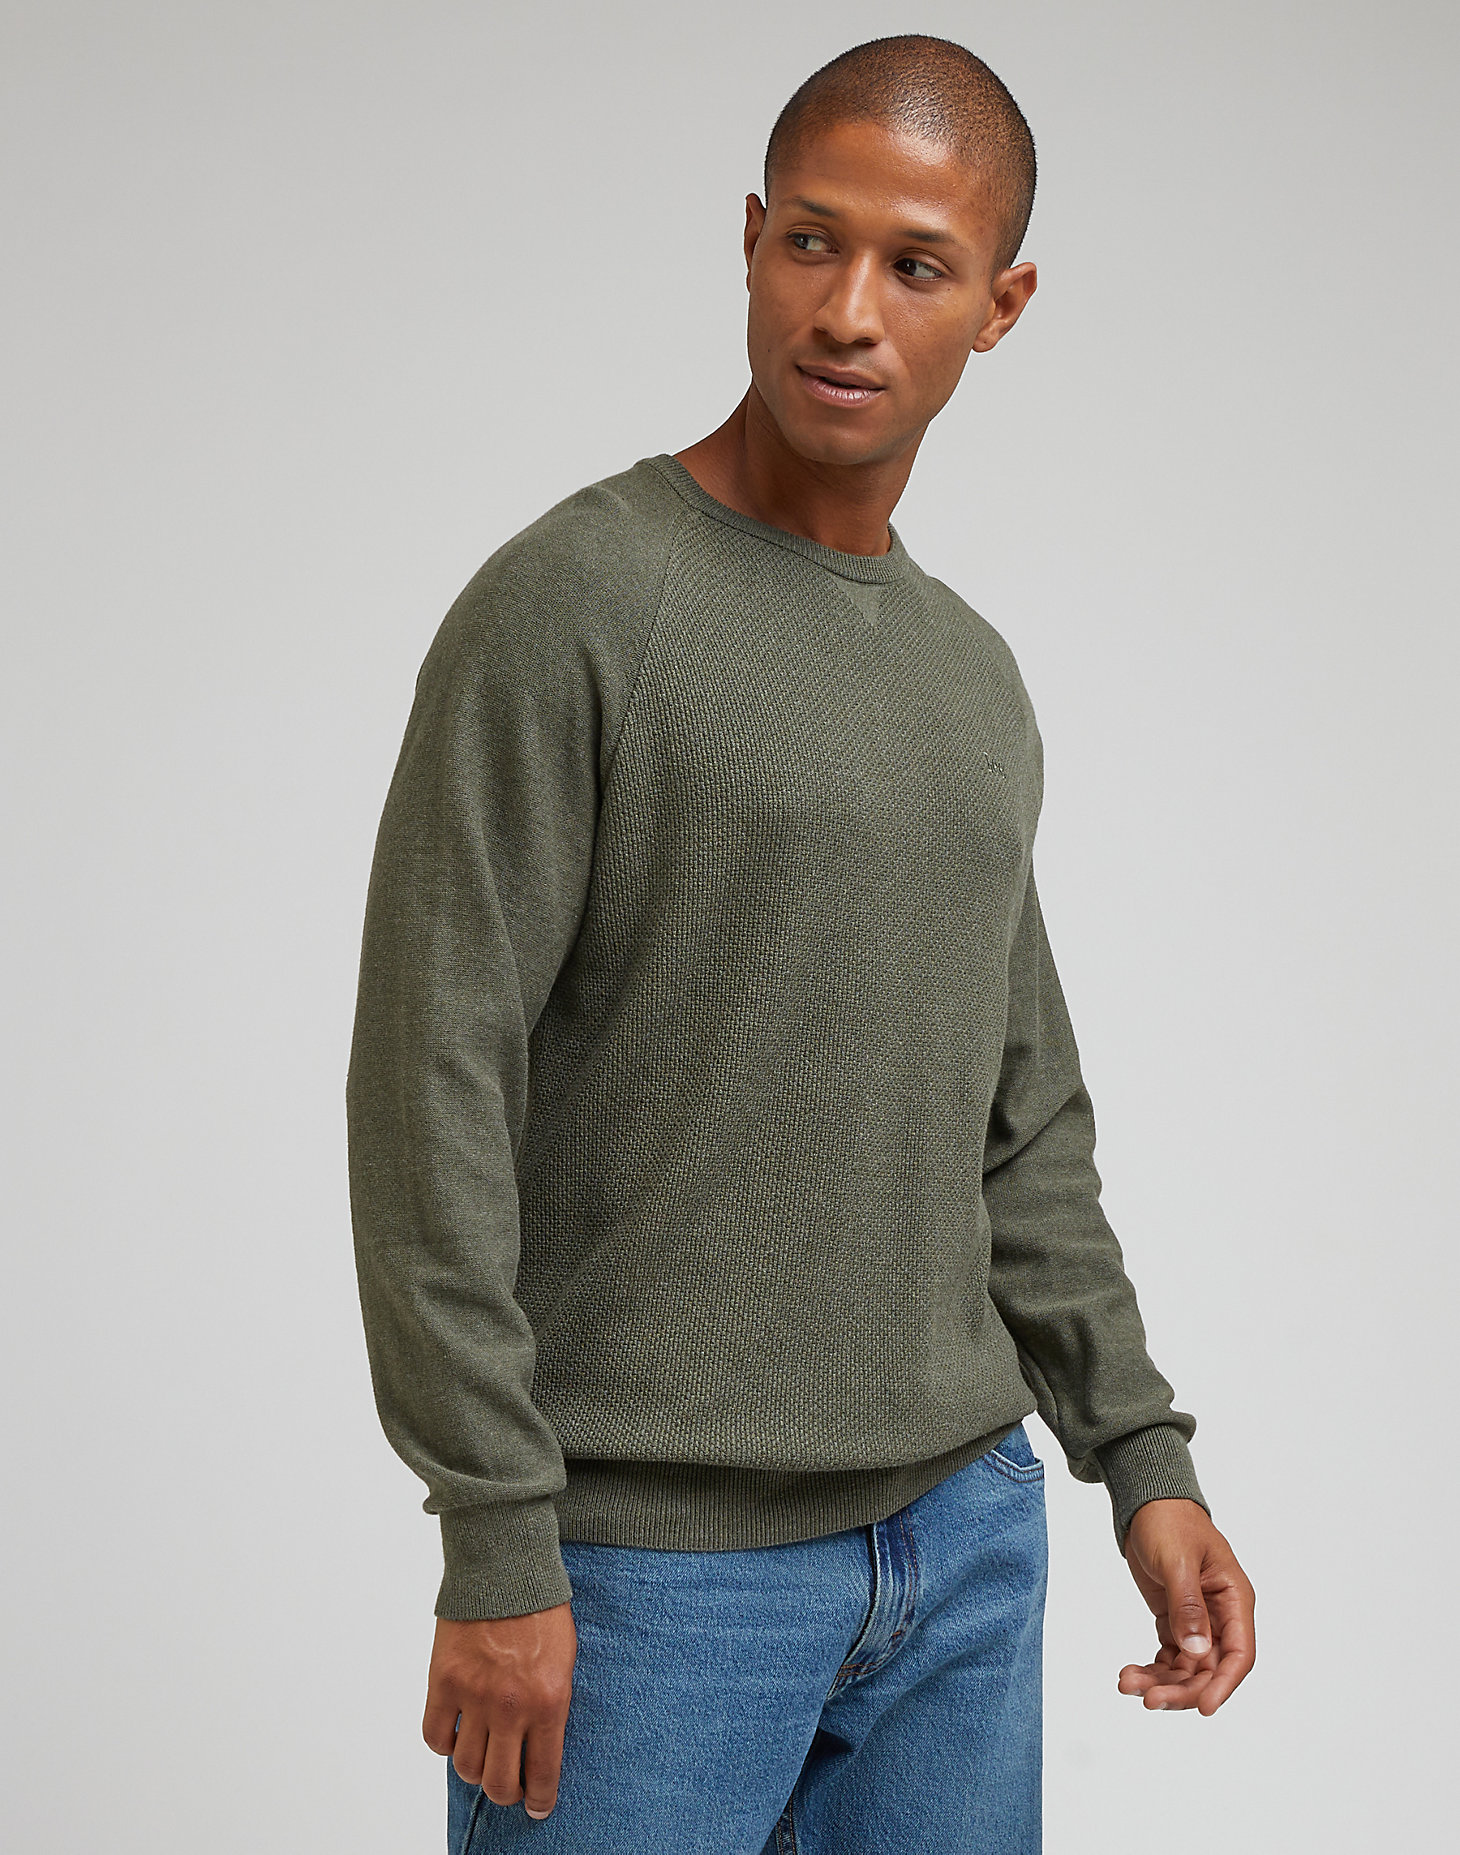 Raglan Crew Knit in Olive Grove main view